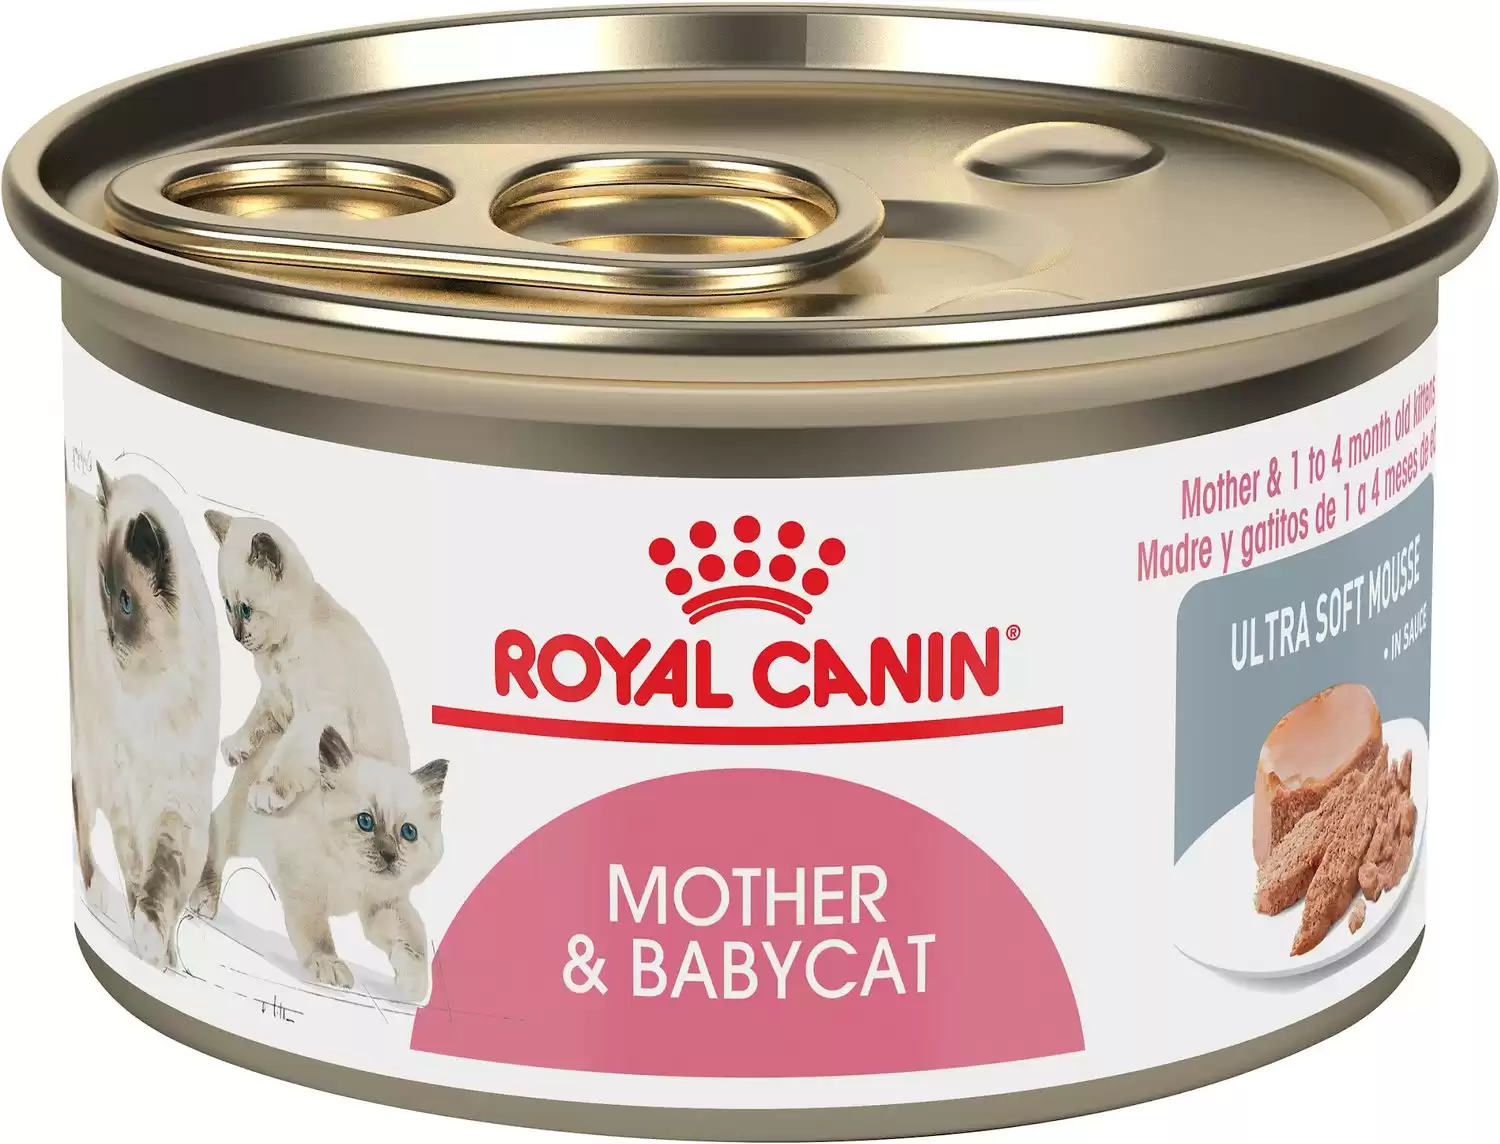 Royal Canin Mother & Babycat Ultra-Soft Mousse in Sauce